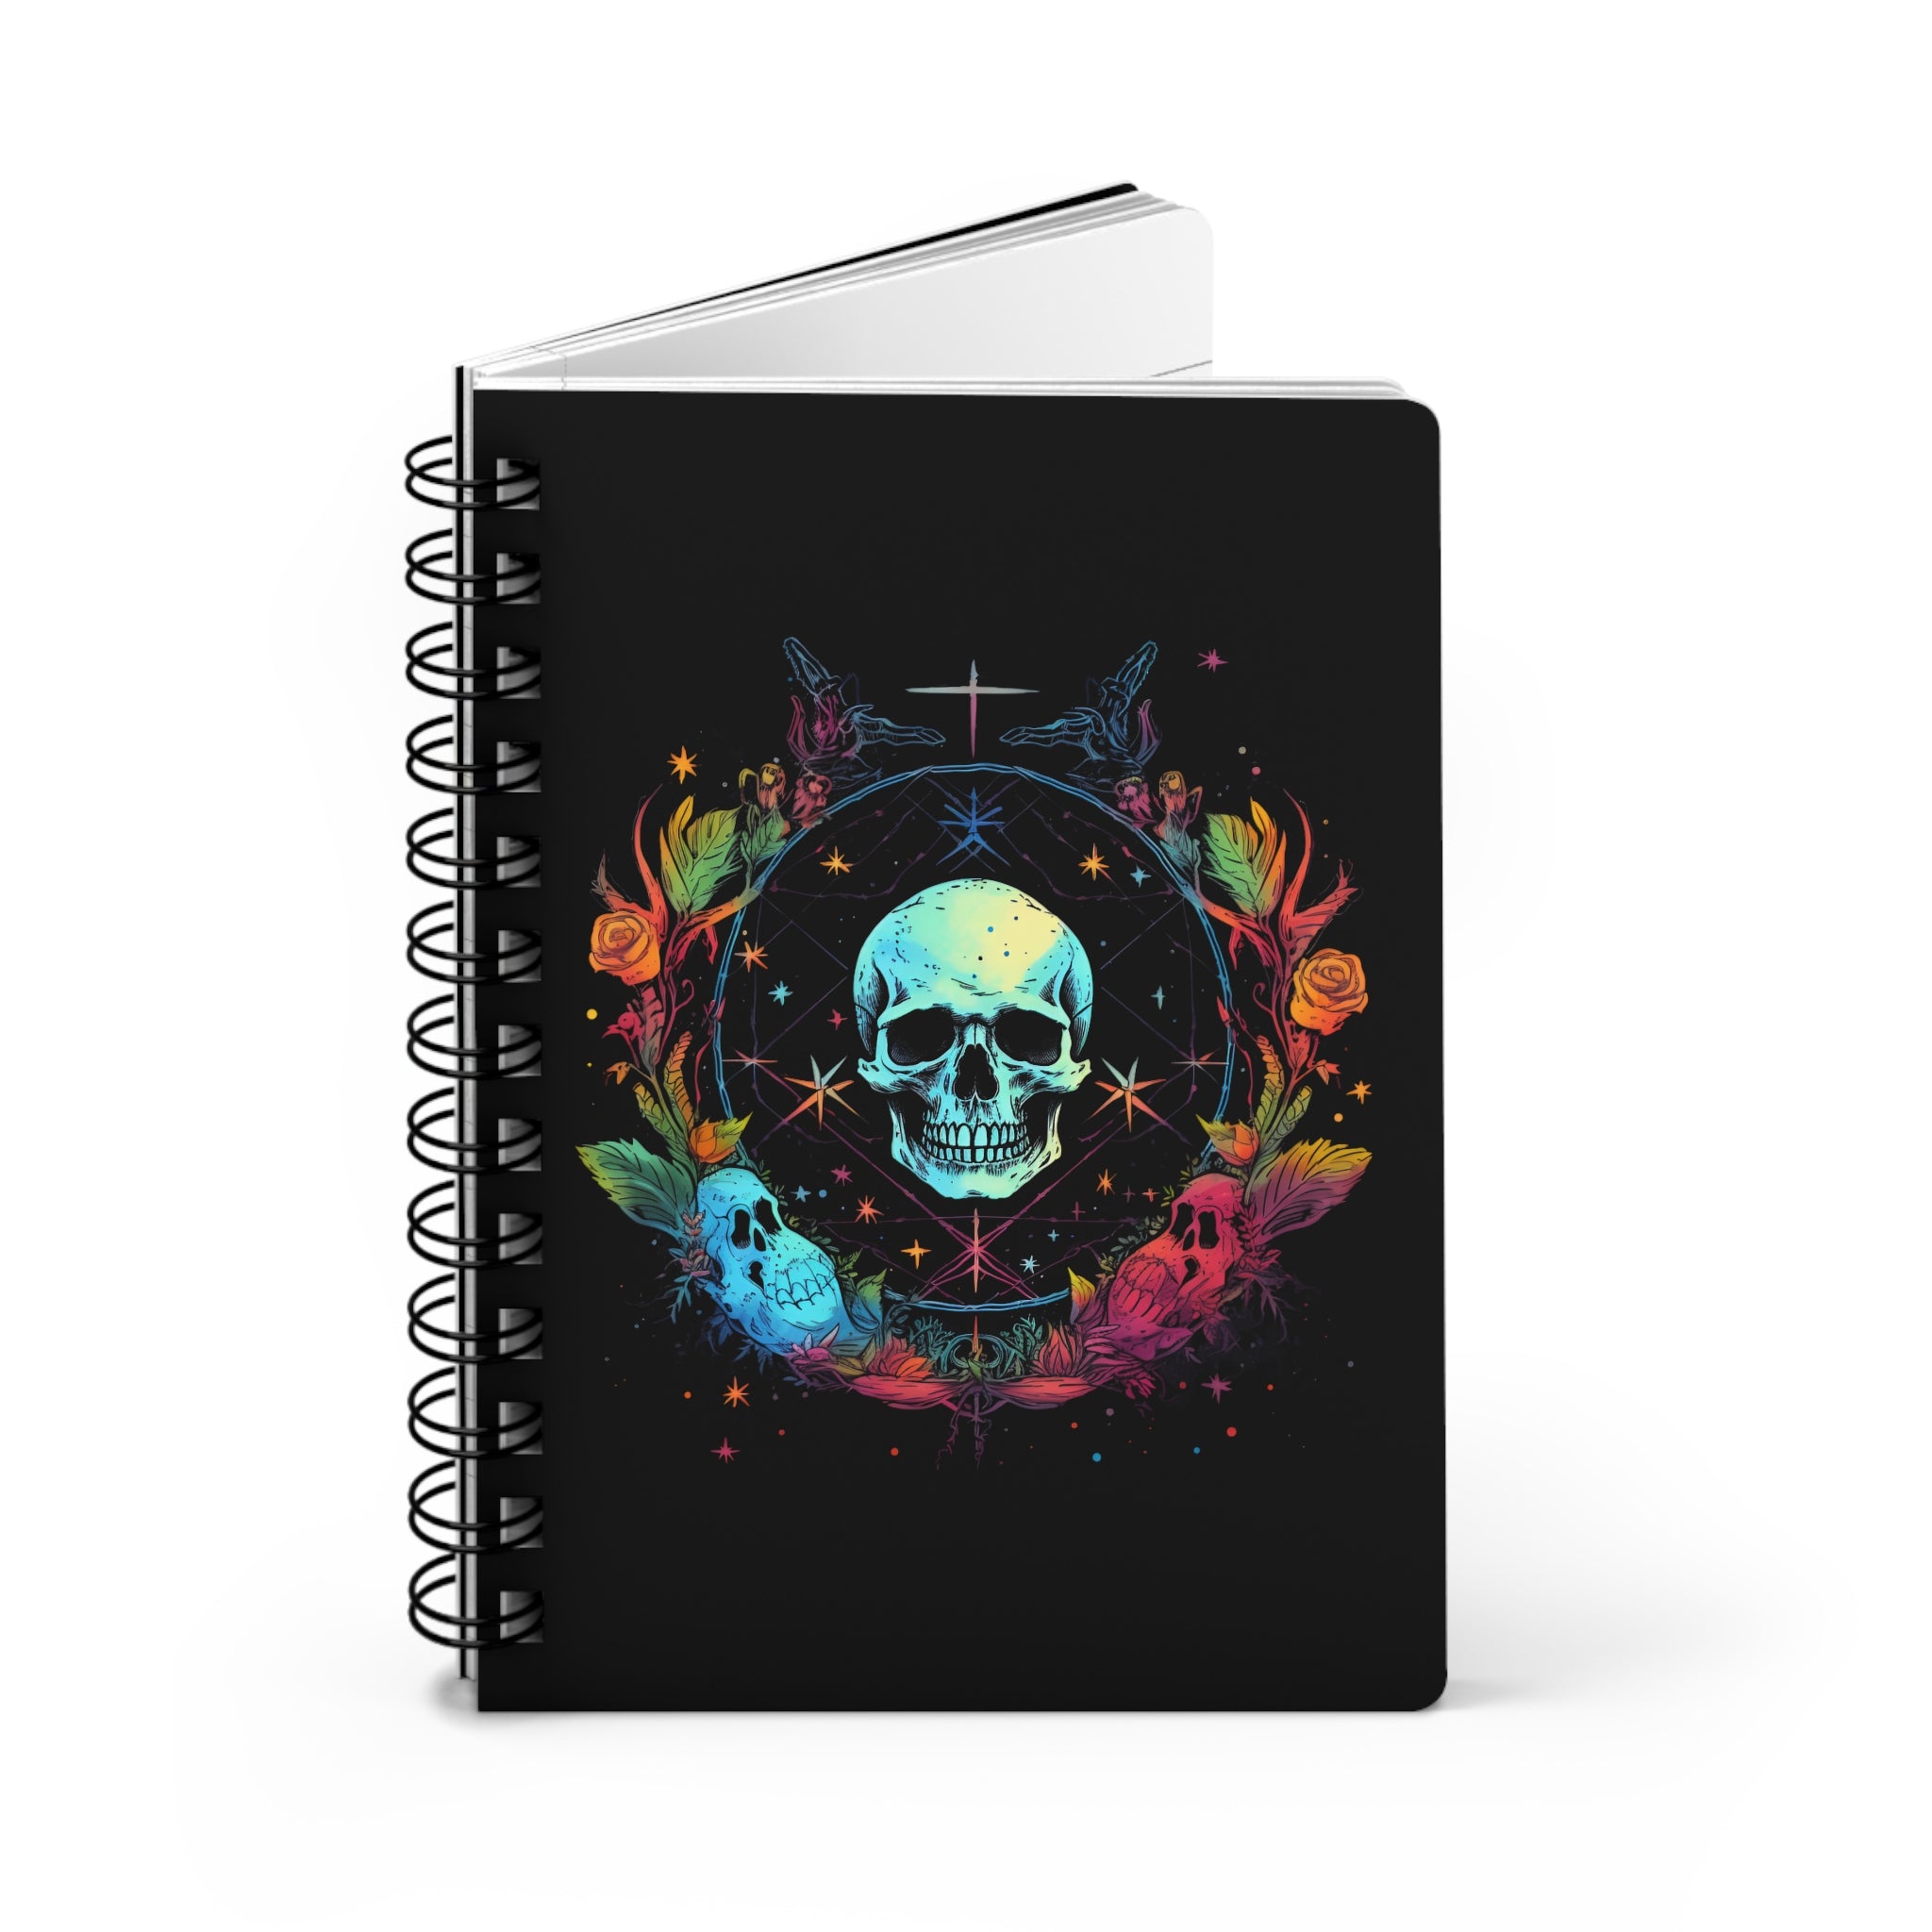 Wizardcore Floral Skull Lined Notebook, Spiral Lined 5 x 7 inch